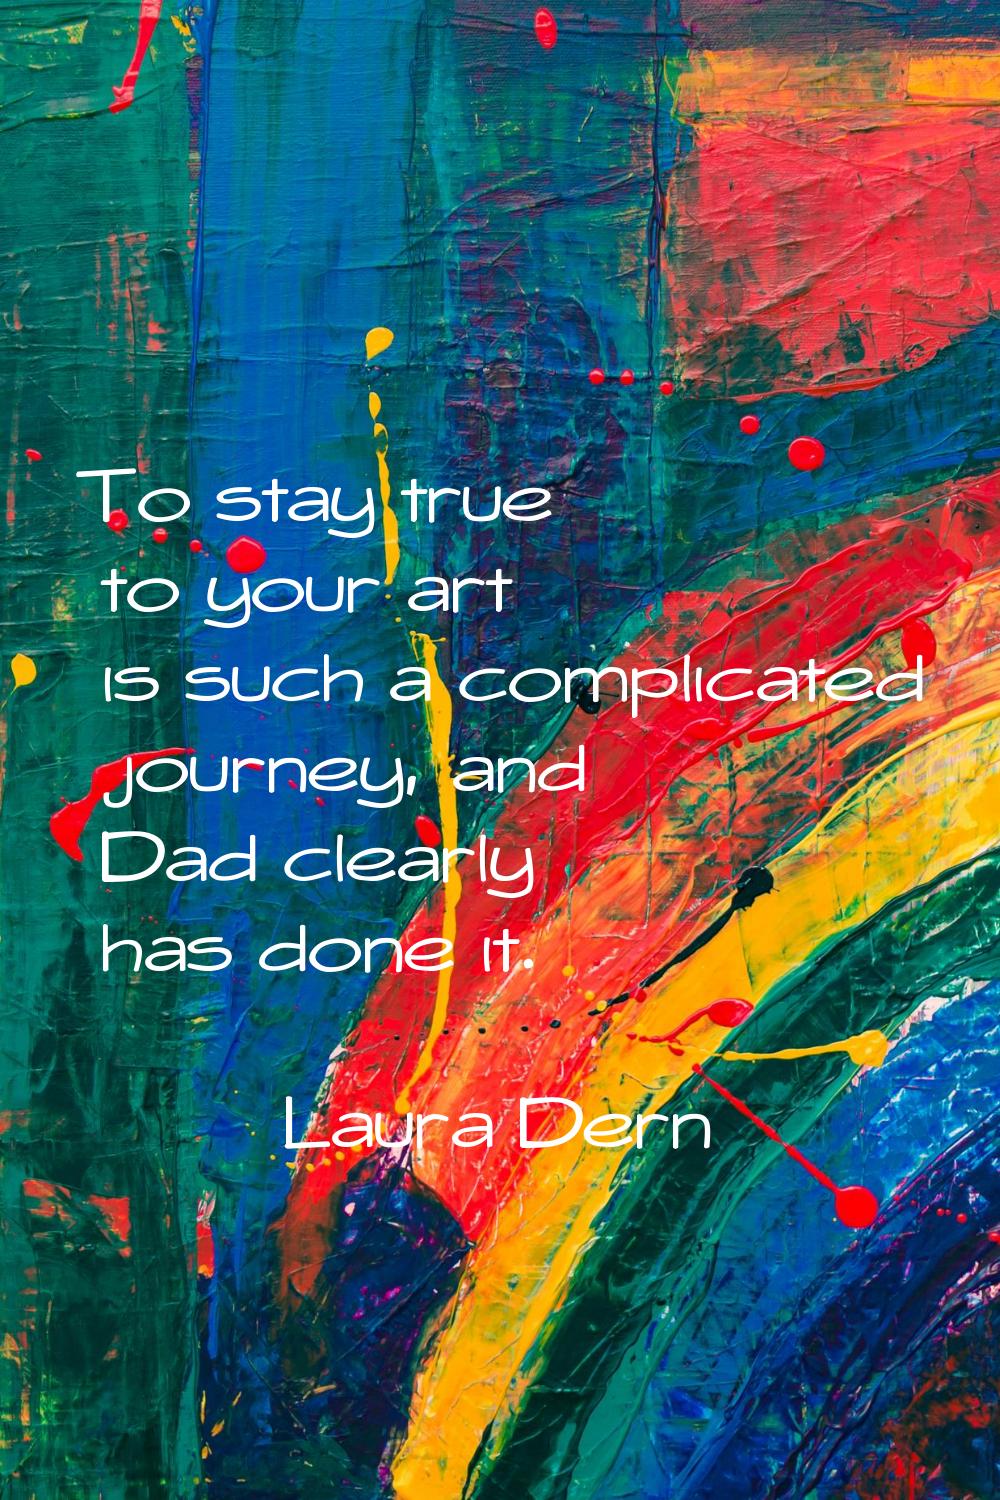 To stay true to your art is such a complicated journey, and Dad clearly has done it.